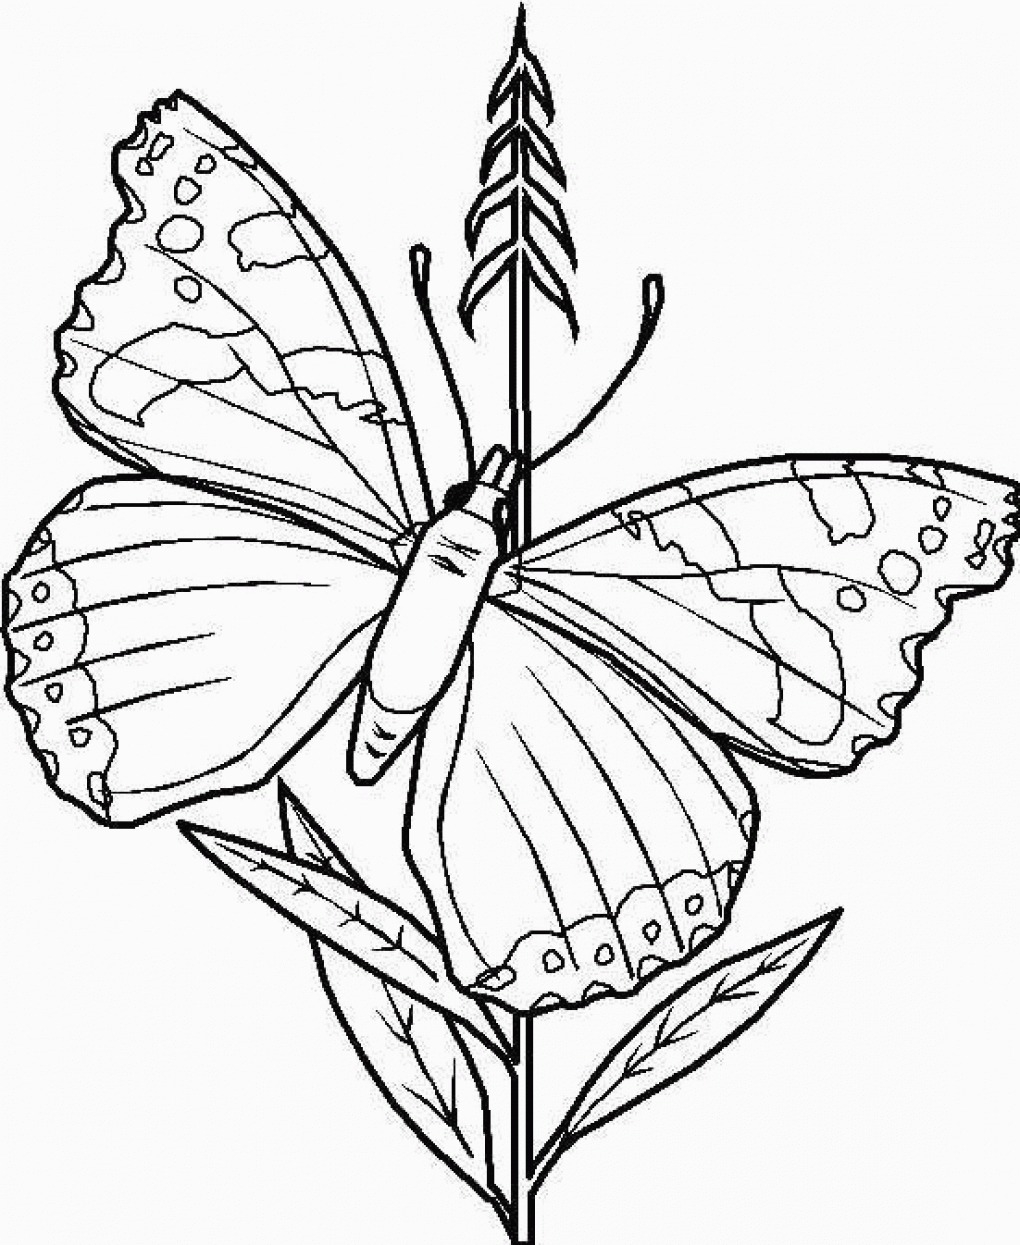 Printable Butterfly Coloring Pages Free Printable Butterfly Coloring Pages For Kids For Coloring Pages